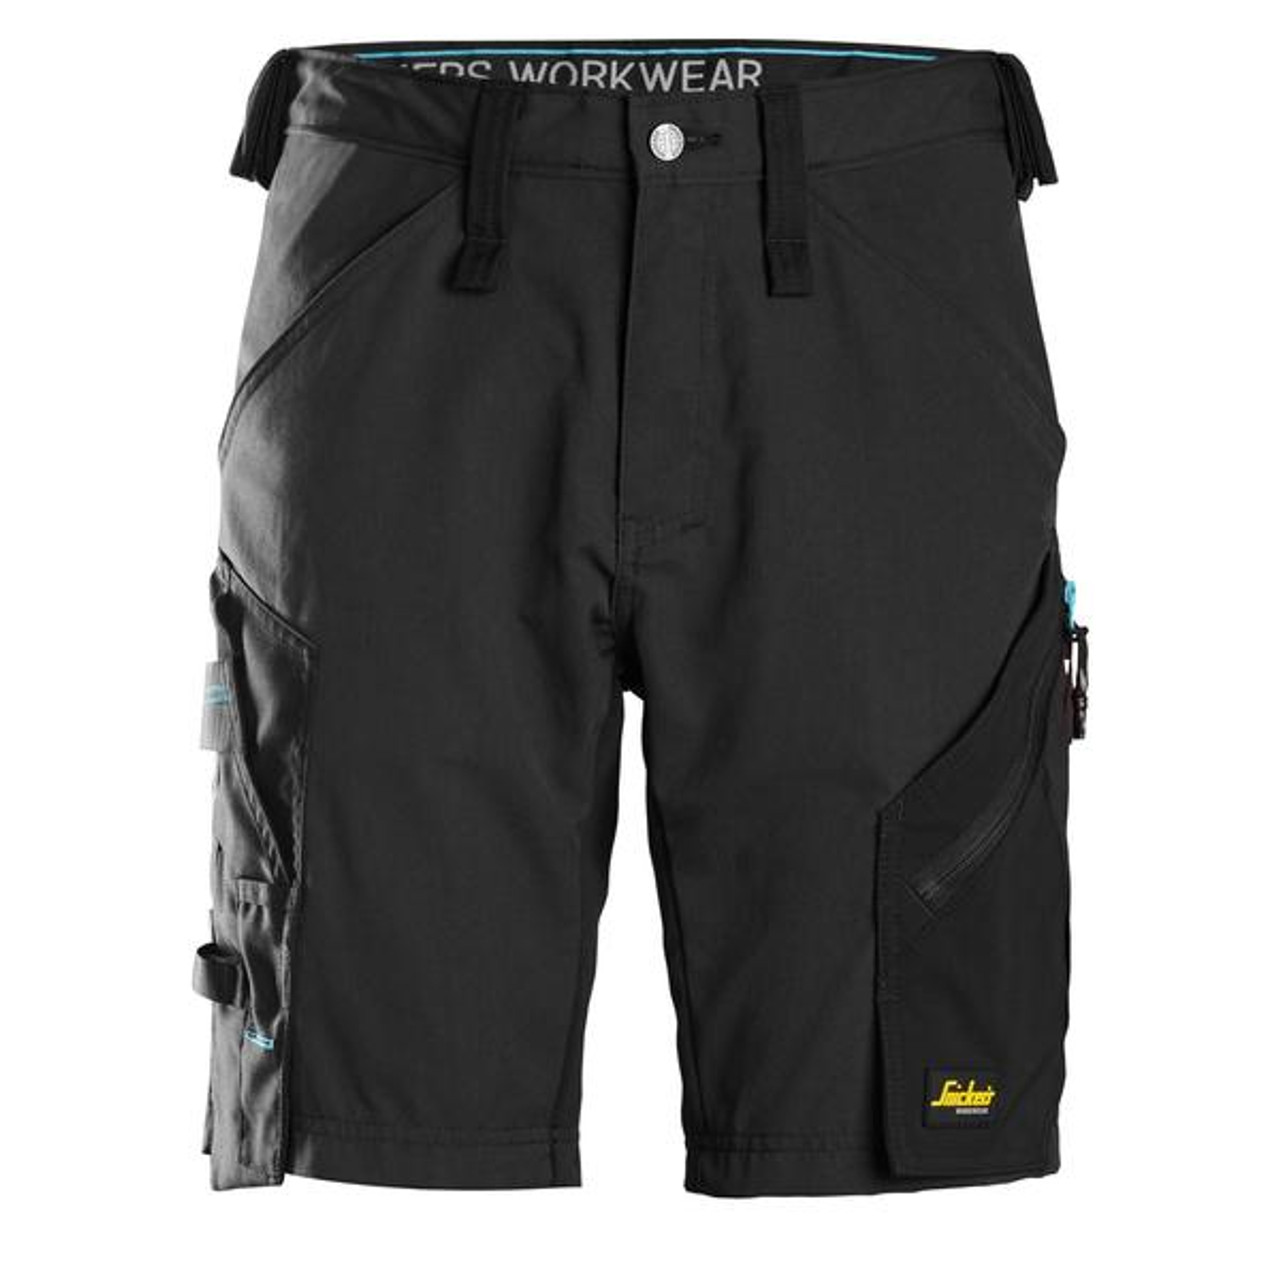 SNICKERS Shorts 6112 with  for SNICKERS Shorts | 6112 Lite Work Black Shorts with Durable Poly/Cotton Blend that have Configuration available in Carpentry